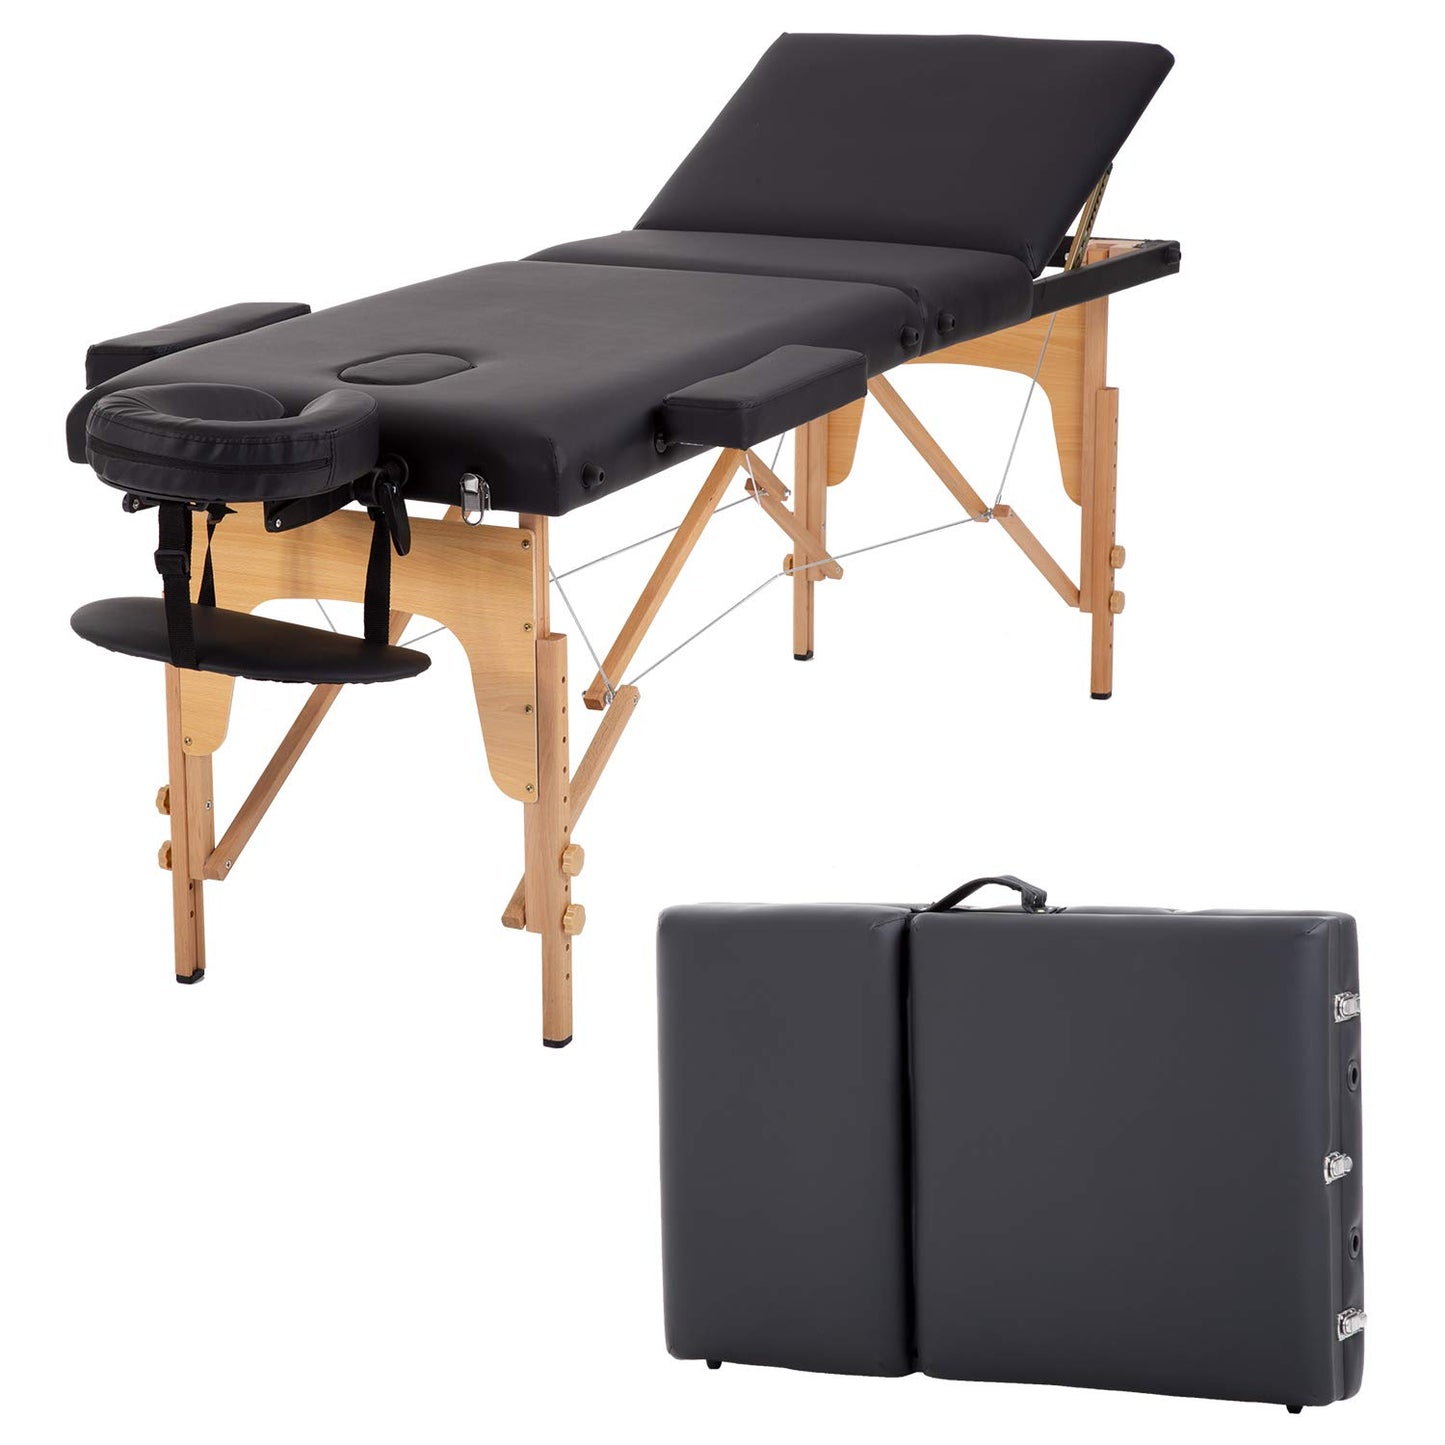 Professional Portable Spa Foldable Wooden Massage Table With Carry Bag - 3 Fold (Premium)